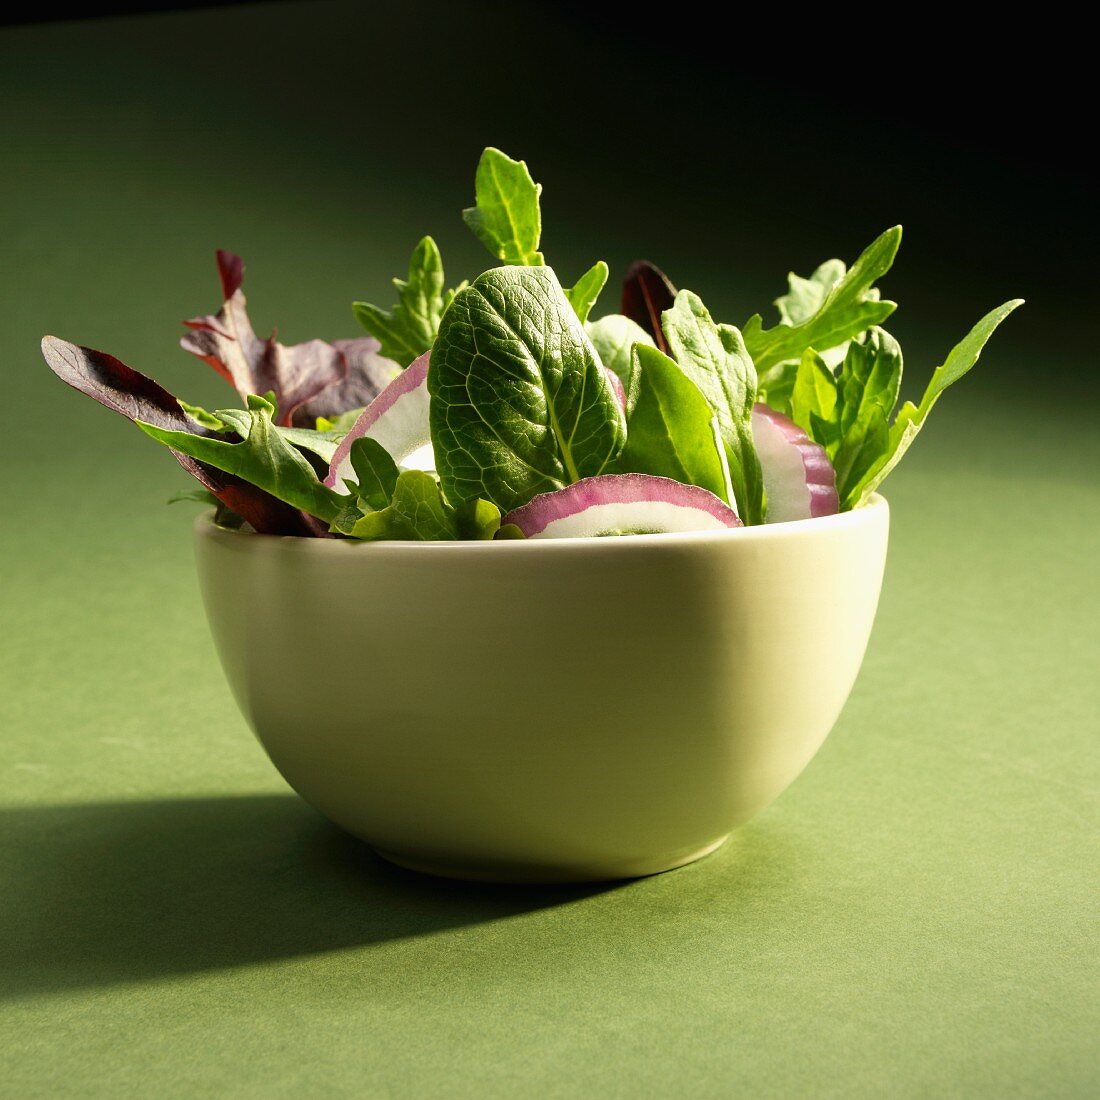 Mixed Greens Salad with Red Onions on a Green Background